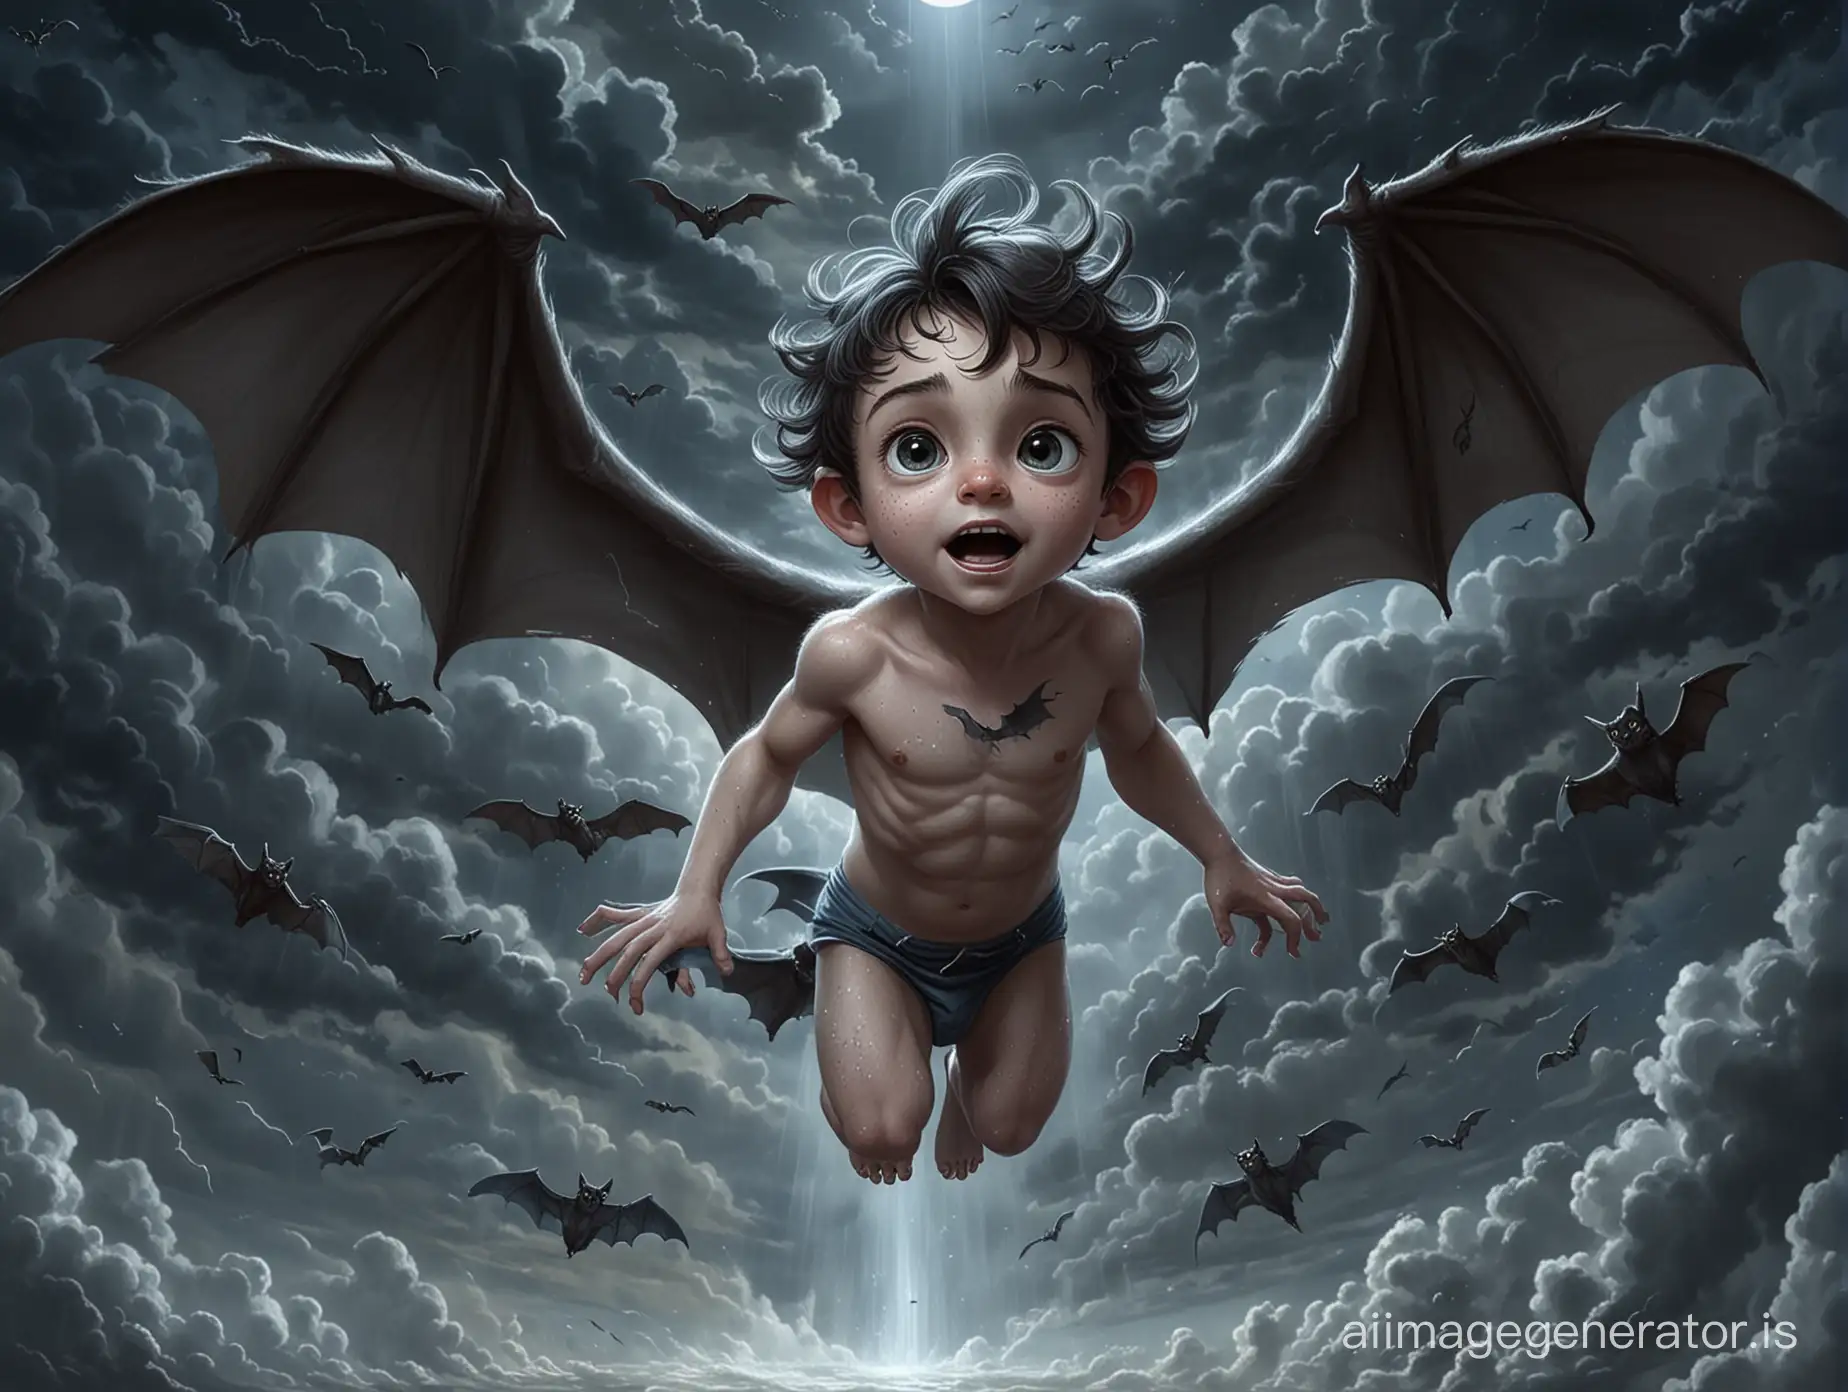 A young male water spout with human proportions, a cute boy face, a tail, and large bat-like wings. He is flying naked in the cloudy night sky. Showing the entire male boy in a long shot. He has smooth gray-blue skin with freckles. He is thin. On the forehead above the eyes are two horns. He has dark hair. He has claws instead of fingers and toes. It is night.